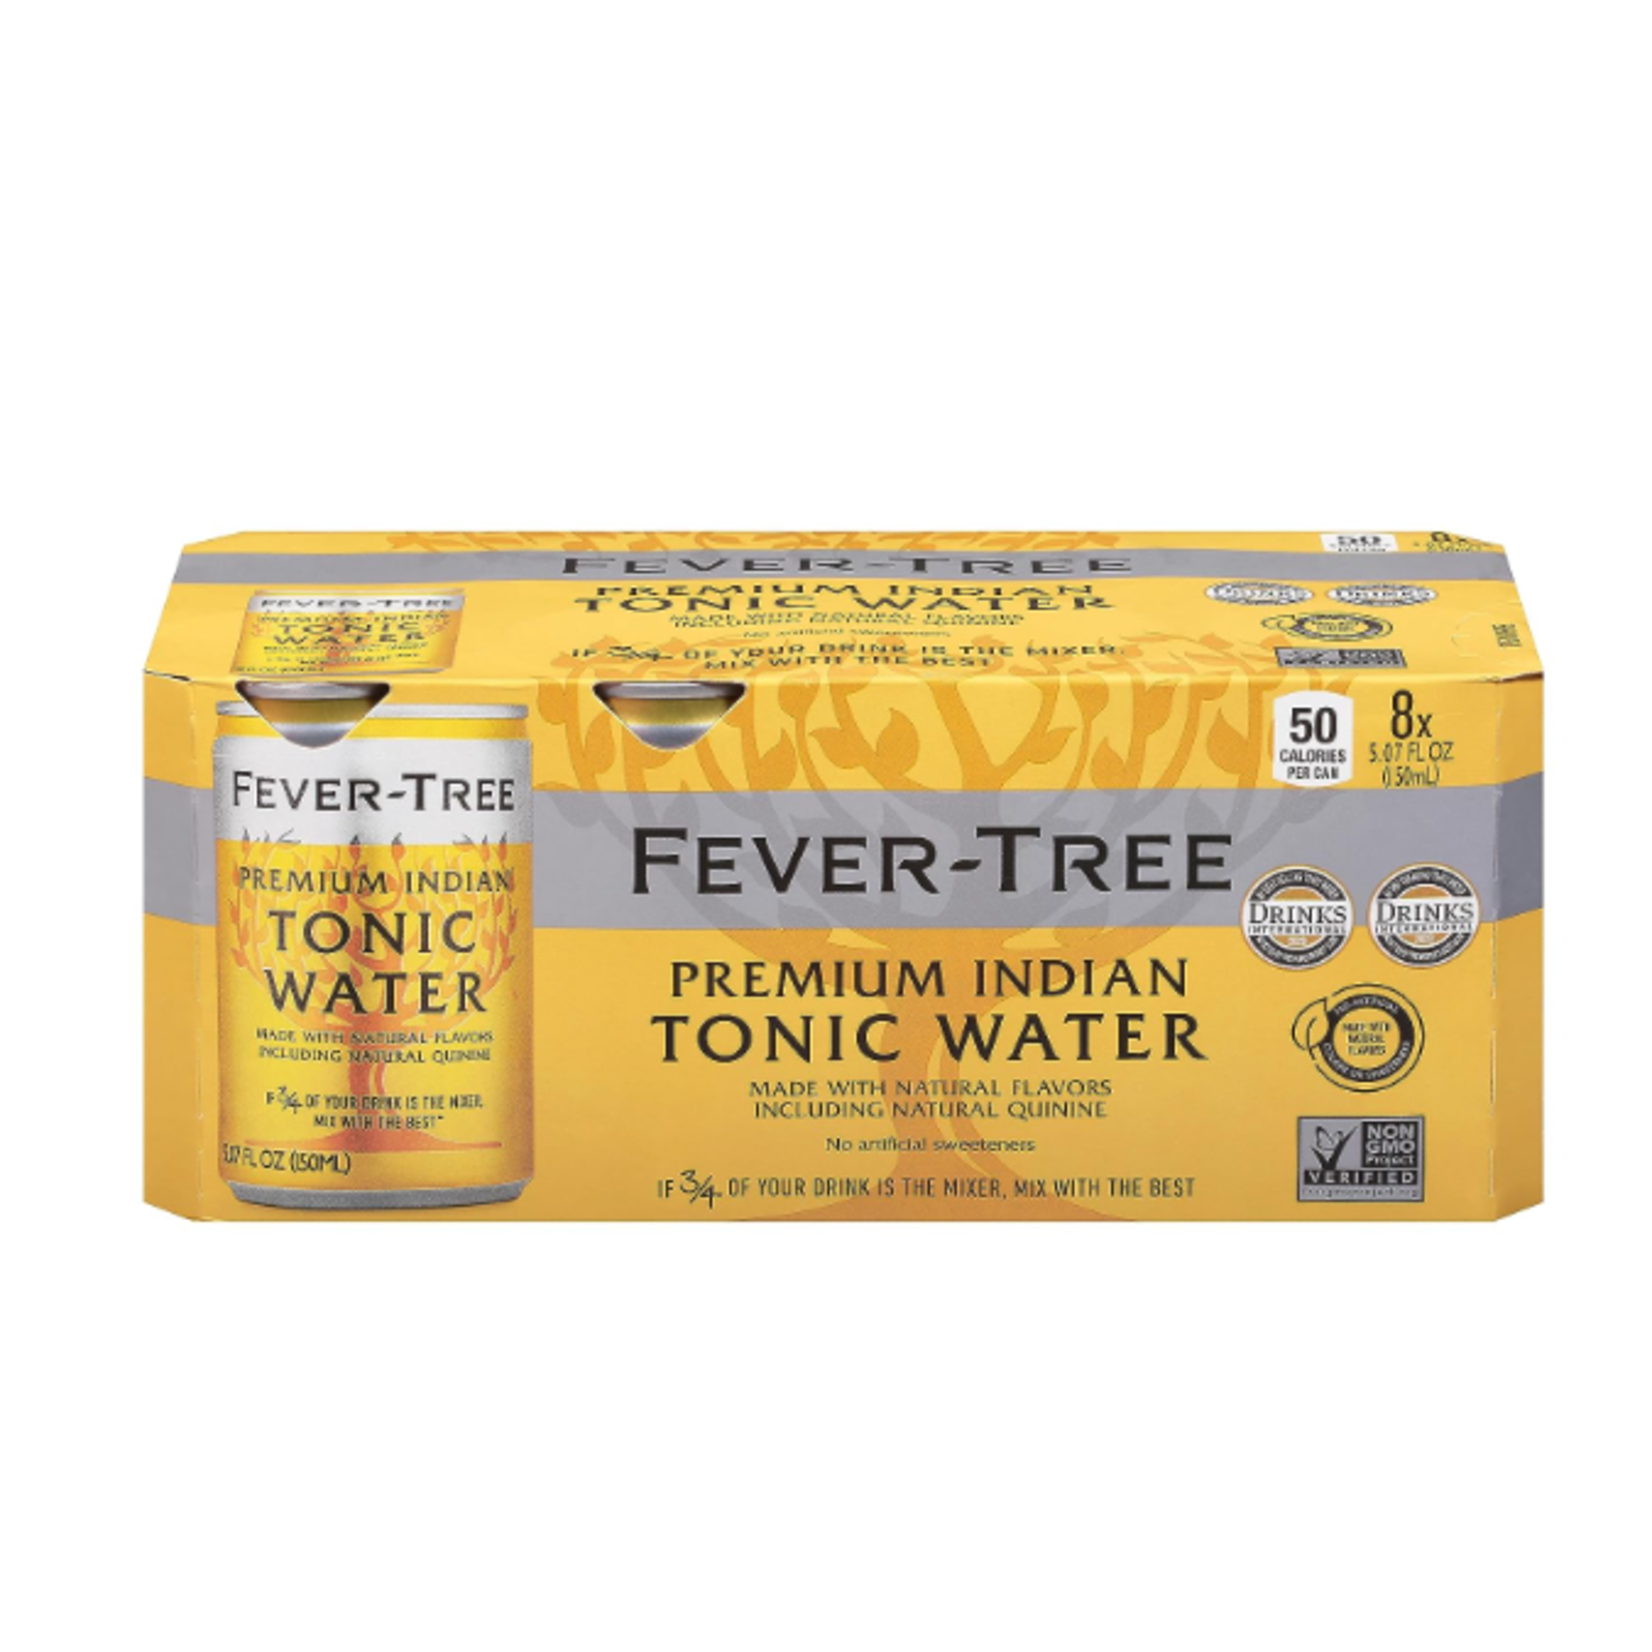 Fever-Tree Fever-Tree Premium Indian Tonic Water 8 pack 5.07 fl oz